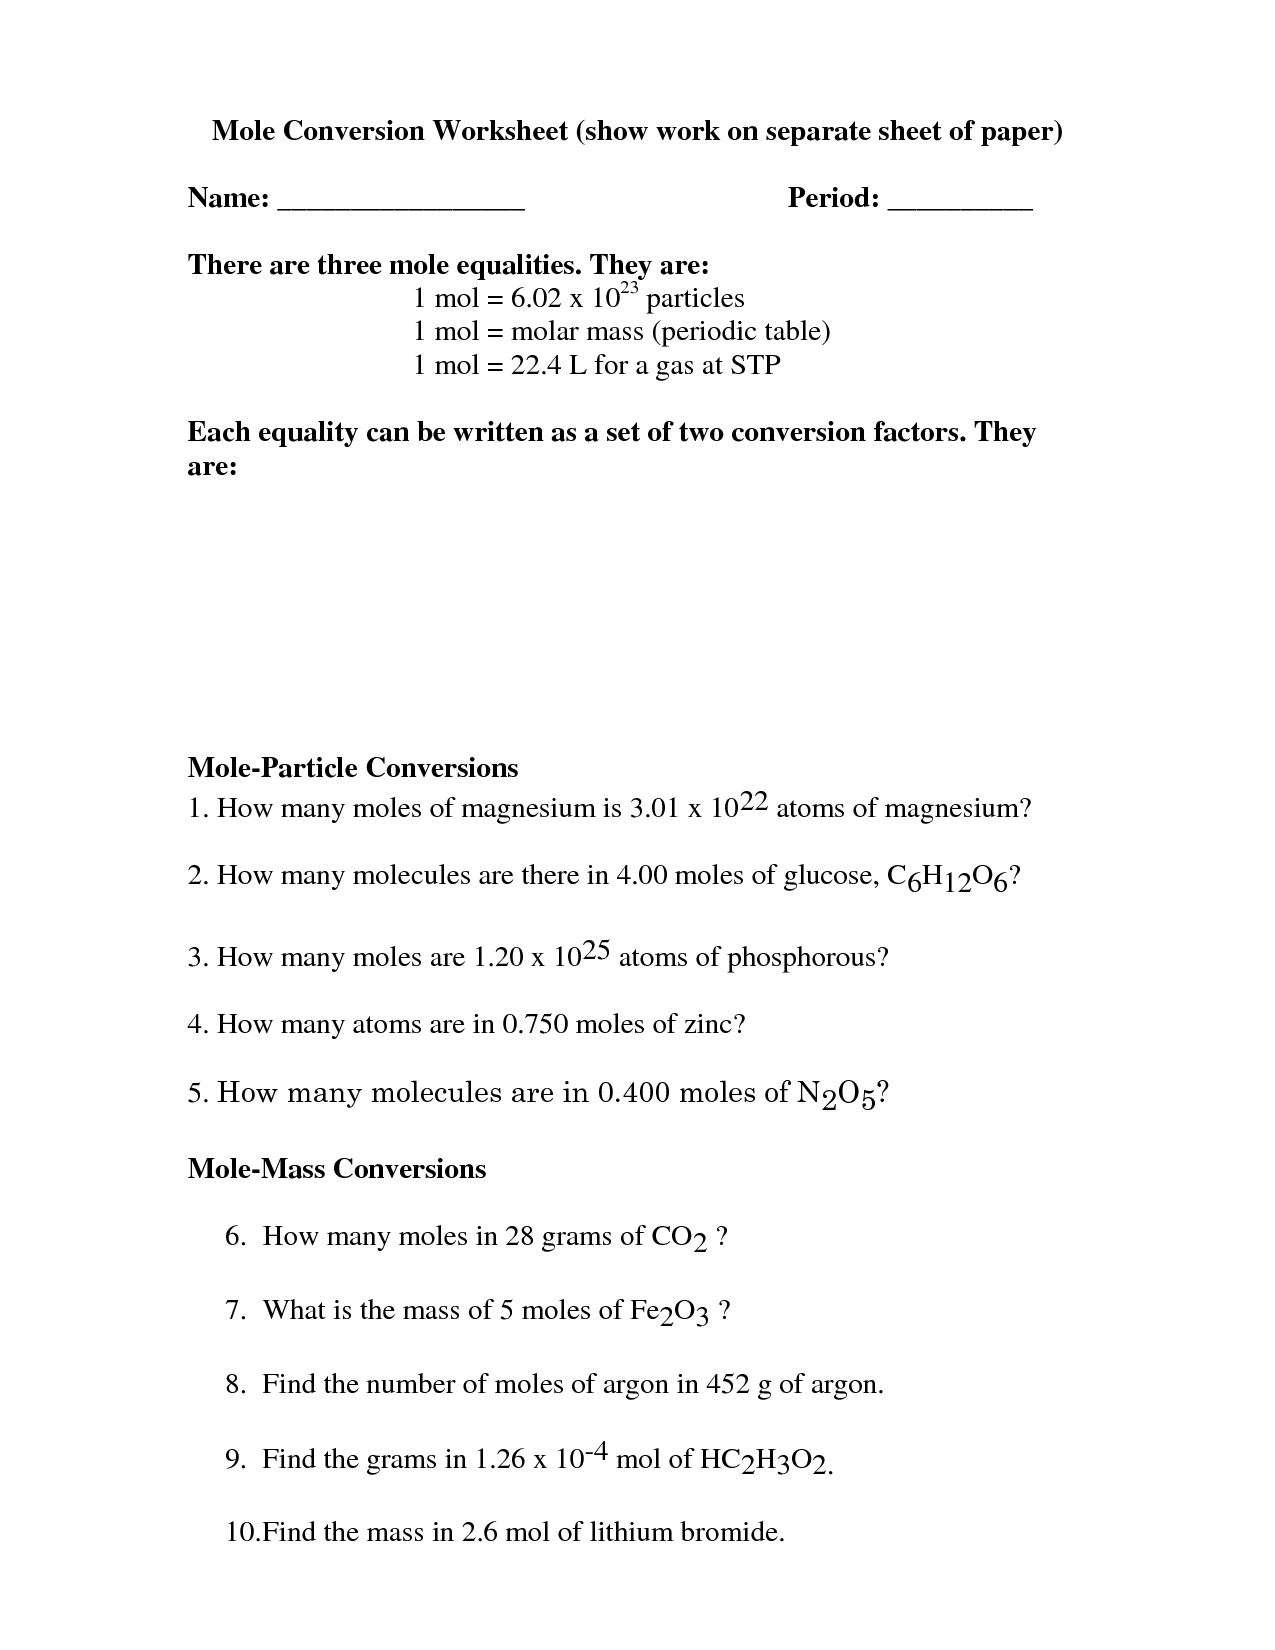 14-best-images-of-mole-to-mole-conversions-worksheet-answer-key-mole-conversion-worksheet